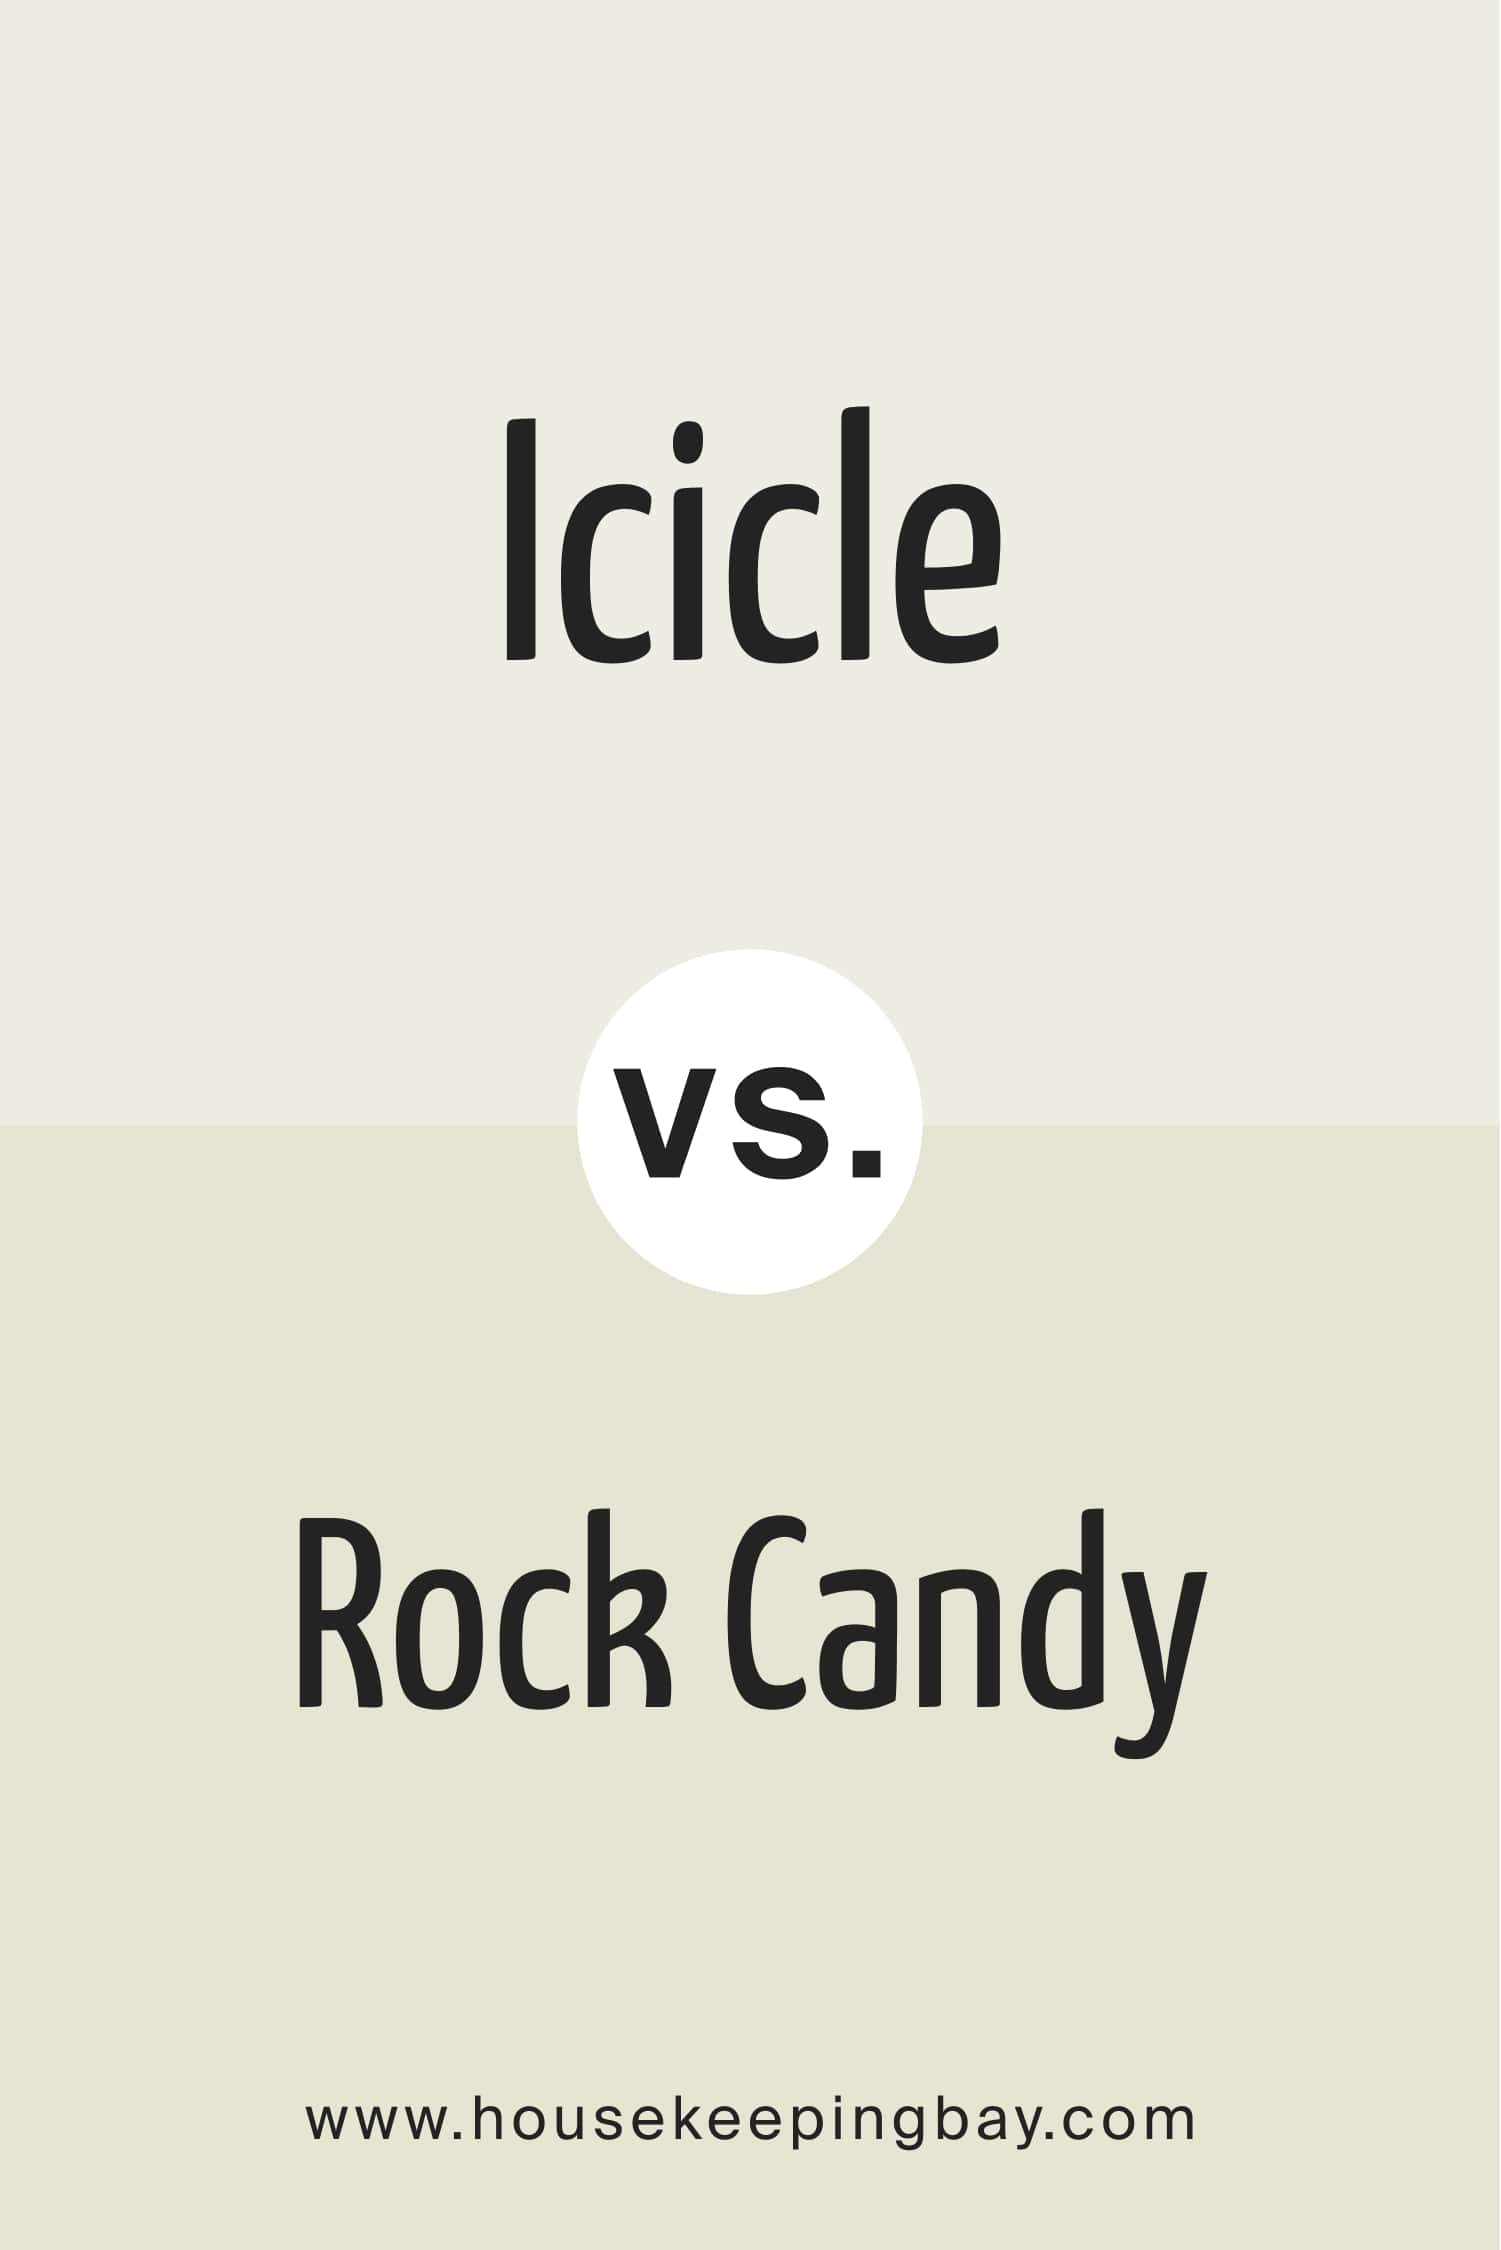 Icicle vs SW Rock Candy